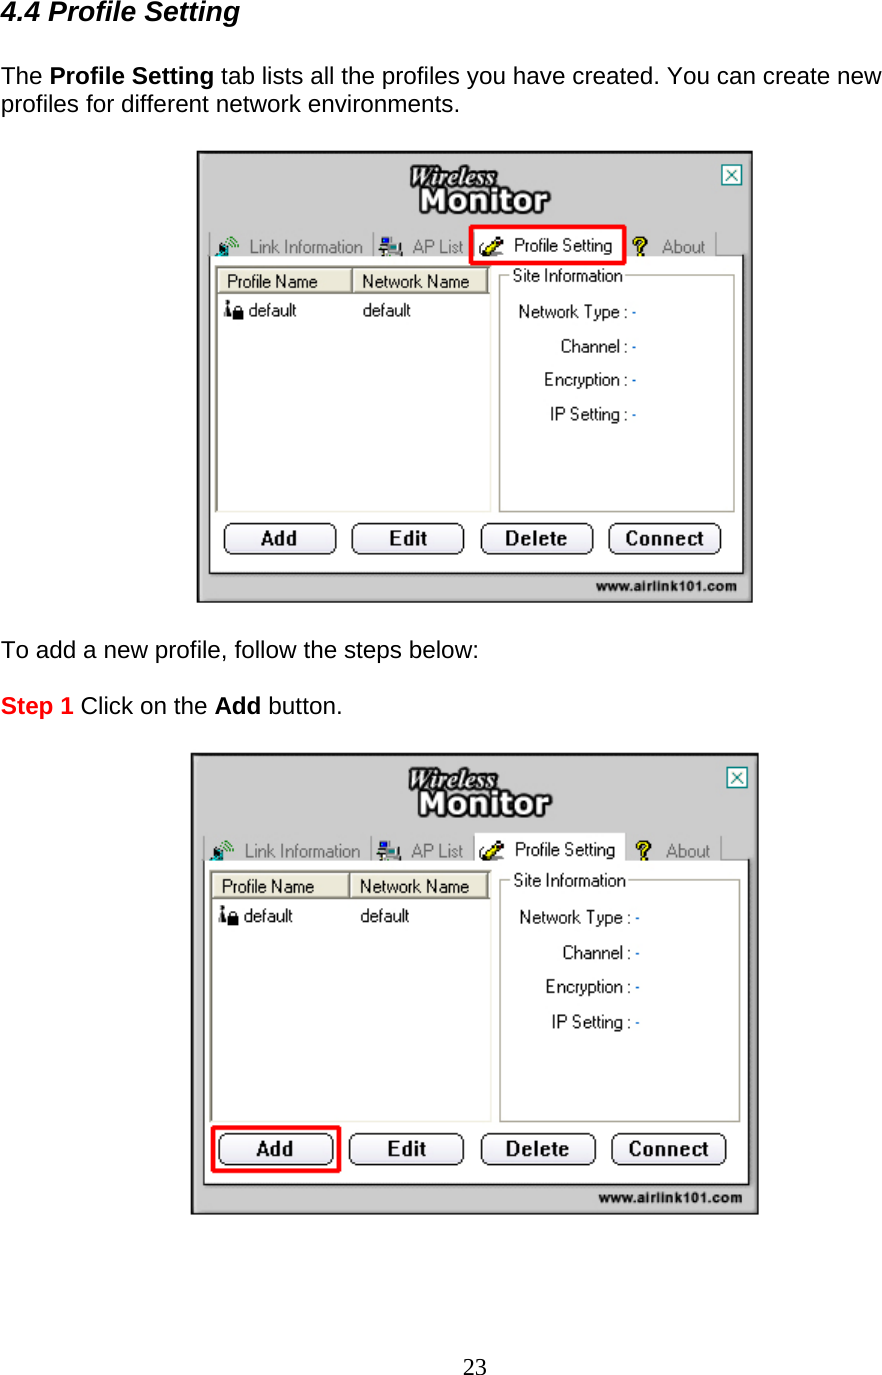 23 4.4 Profile Setting  The Profile Setting tab lists all the profiles you have created. You can create new profiles for different network environments.    To add a new profile, follow the steps below:  Step 1 Click on the Add button.      